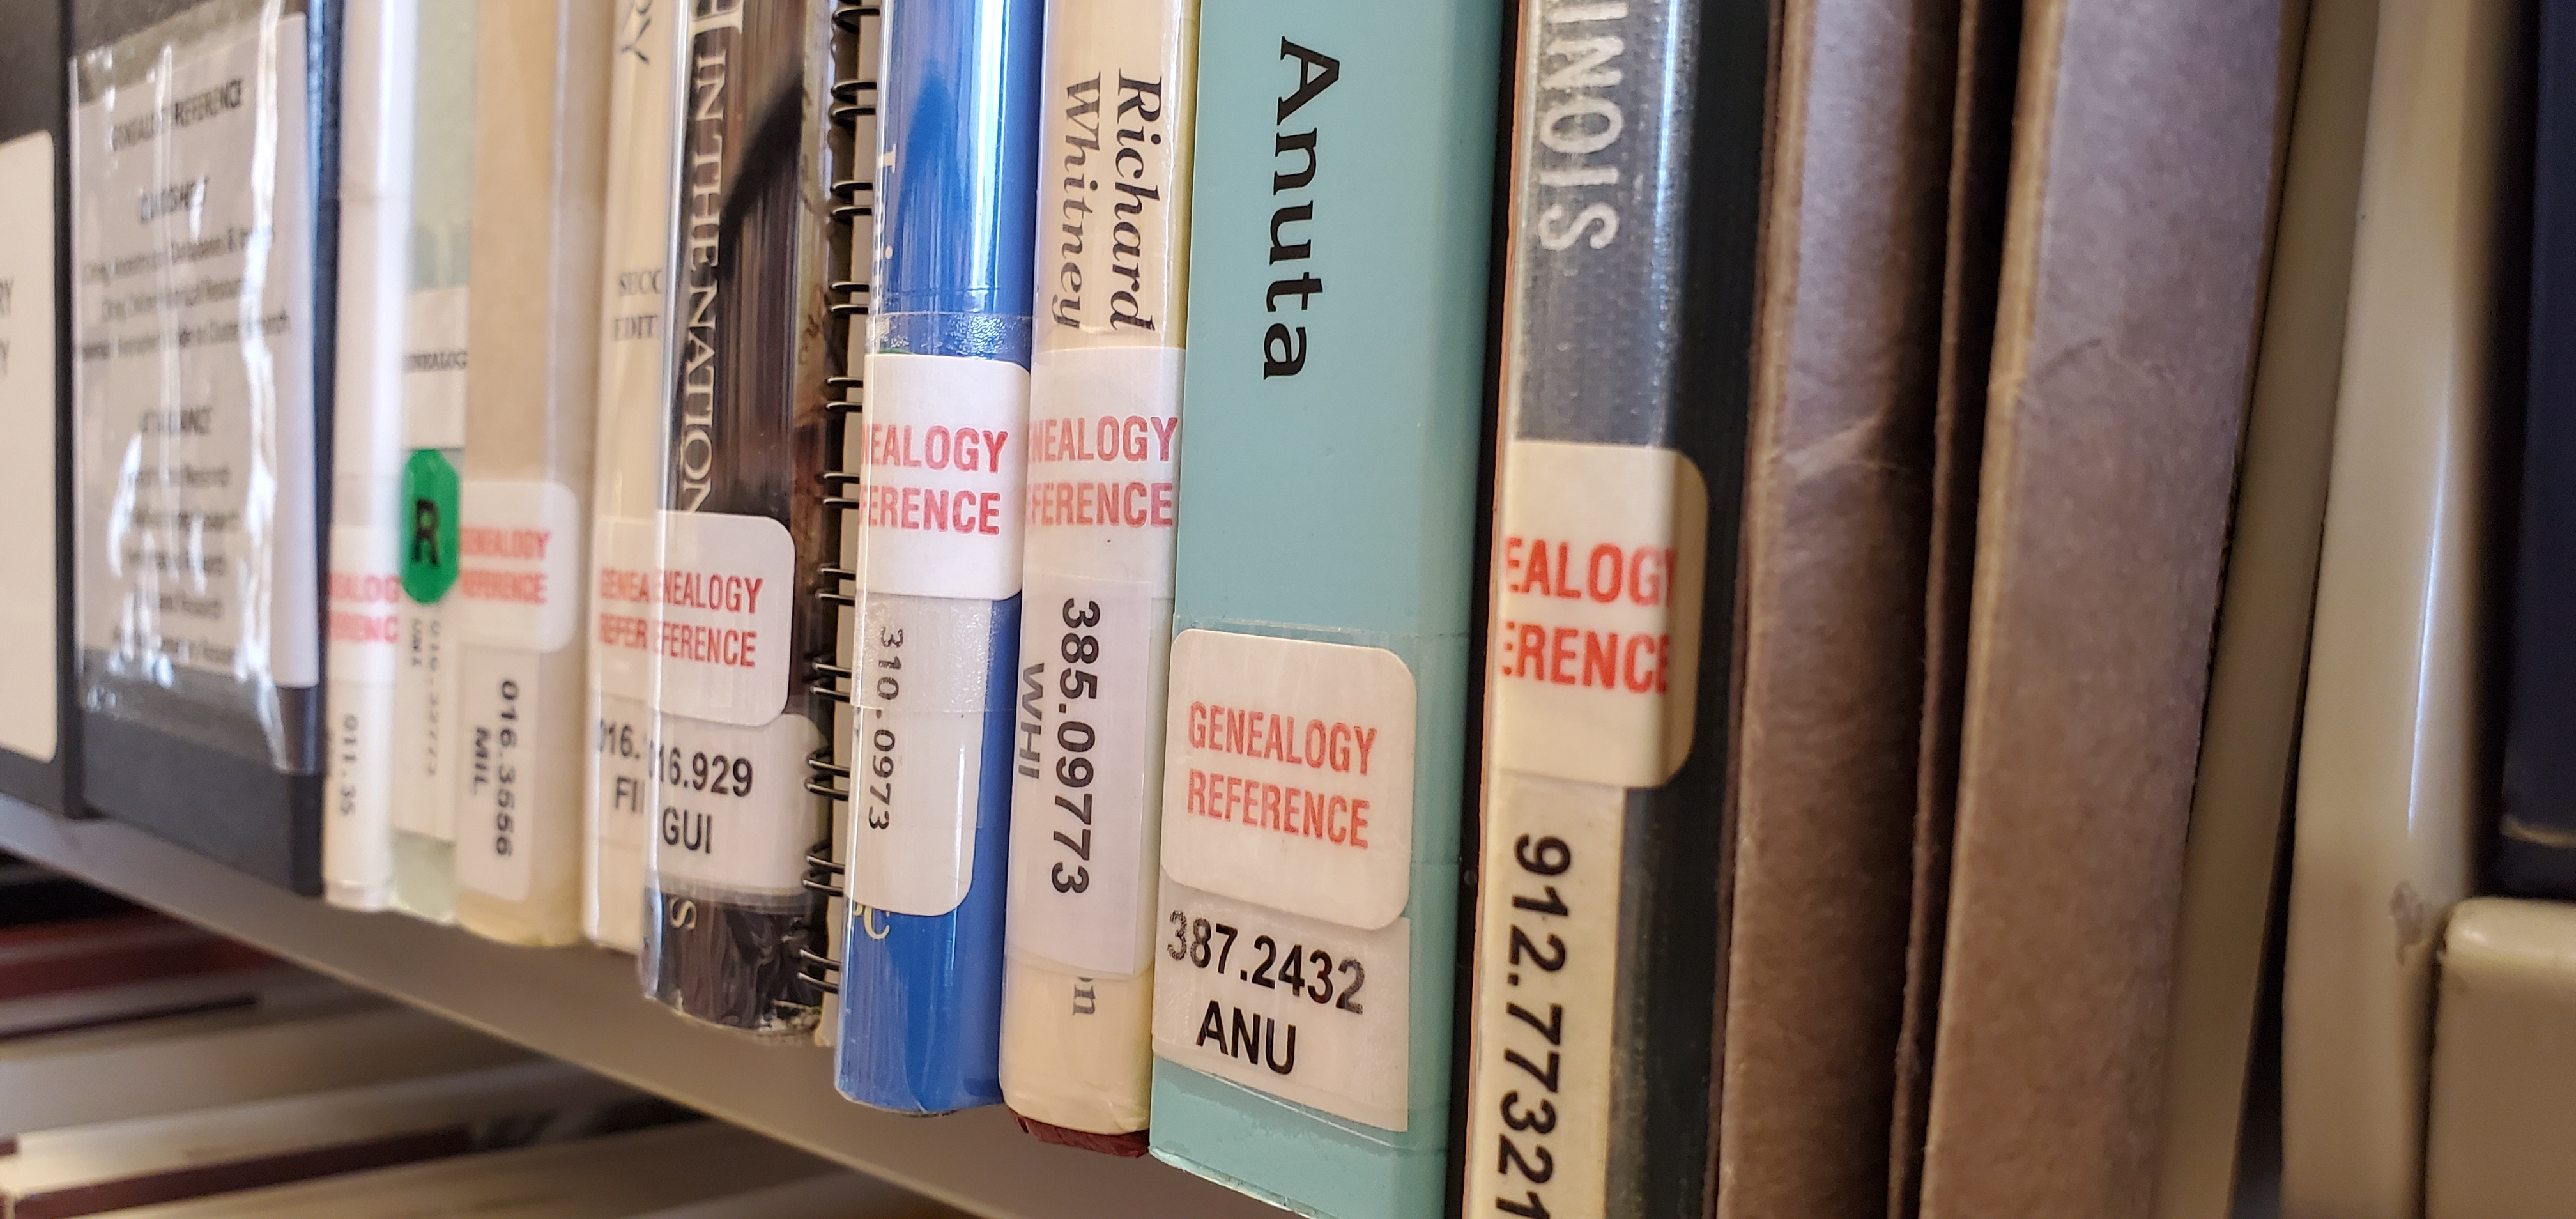 Genealogy reference shelf with non fiction books